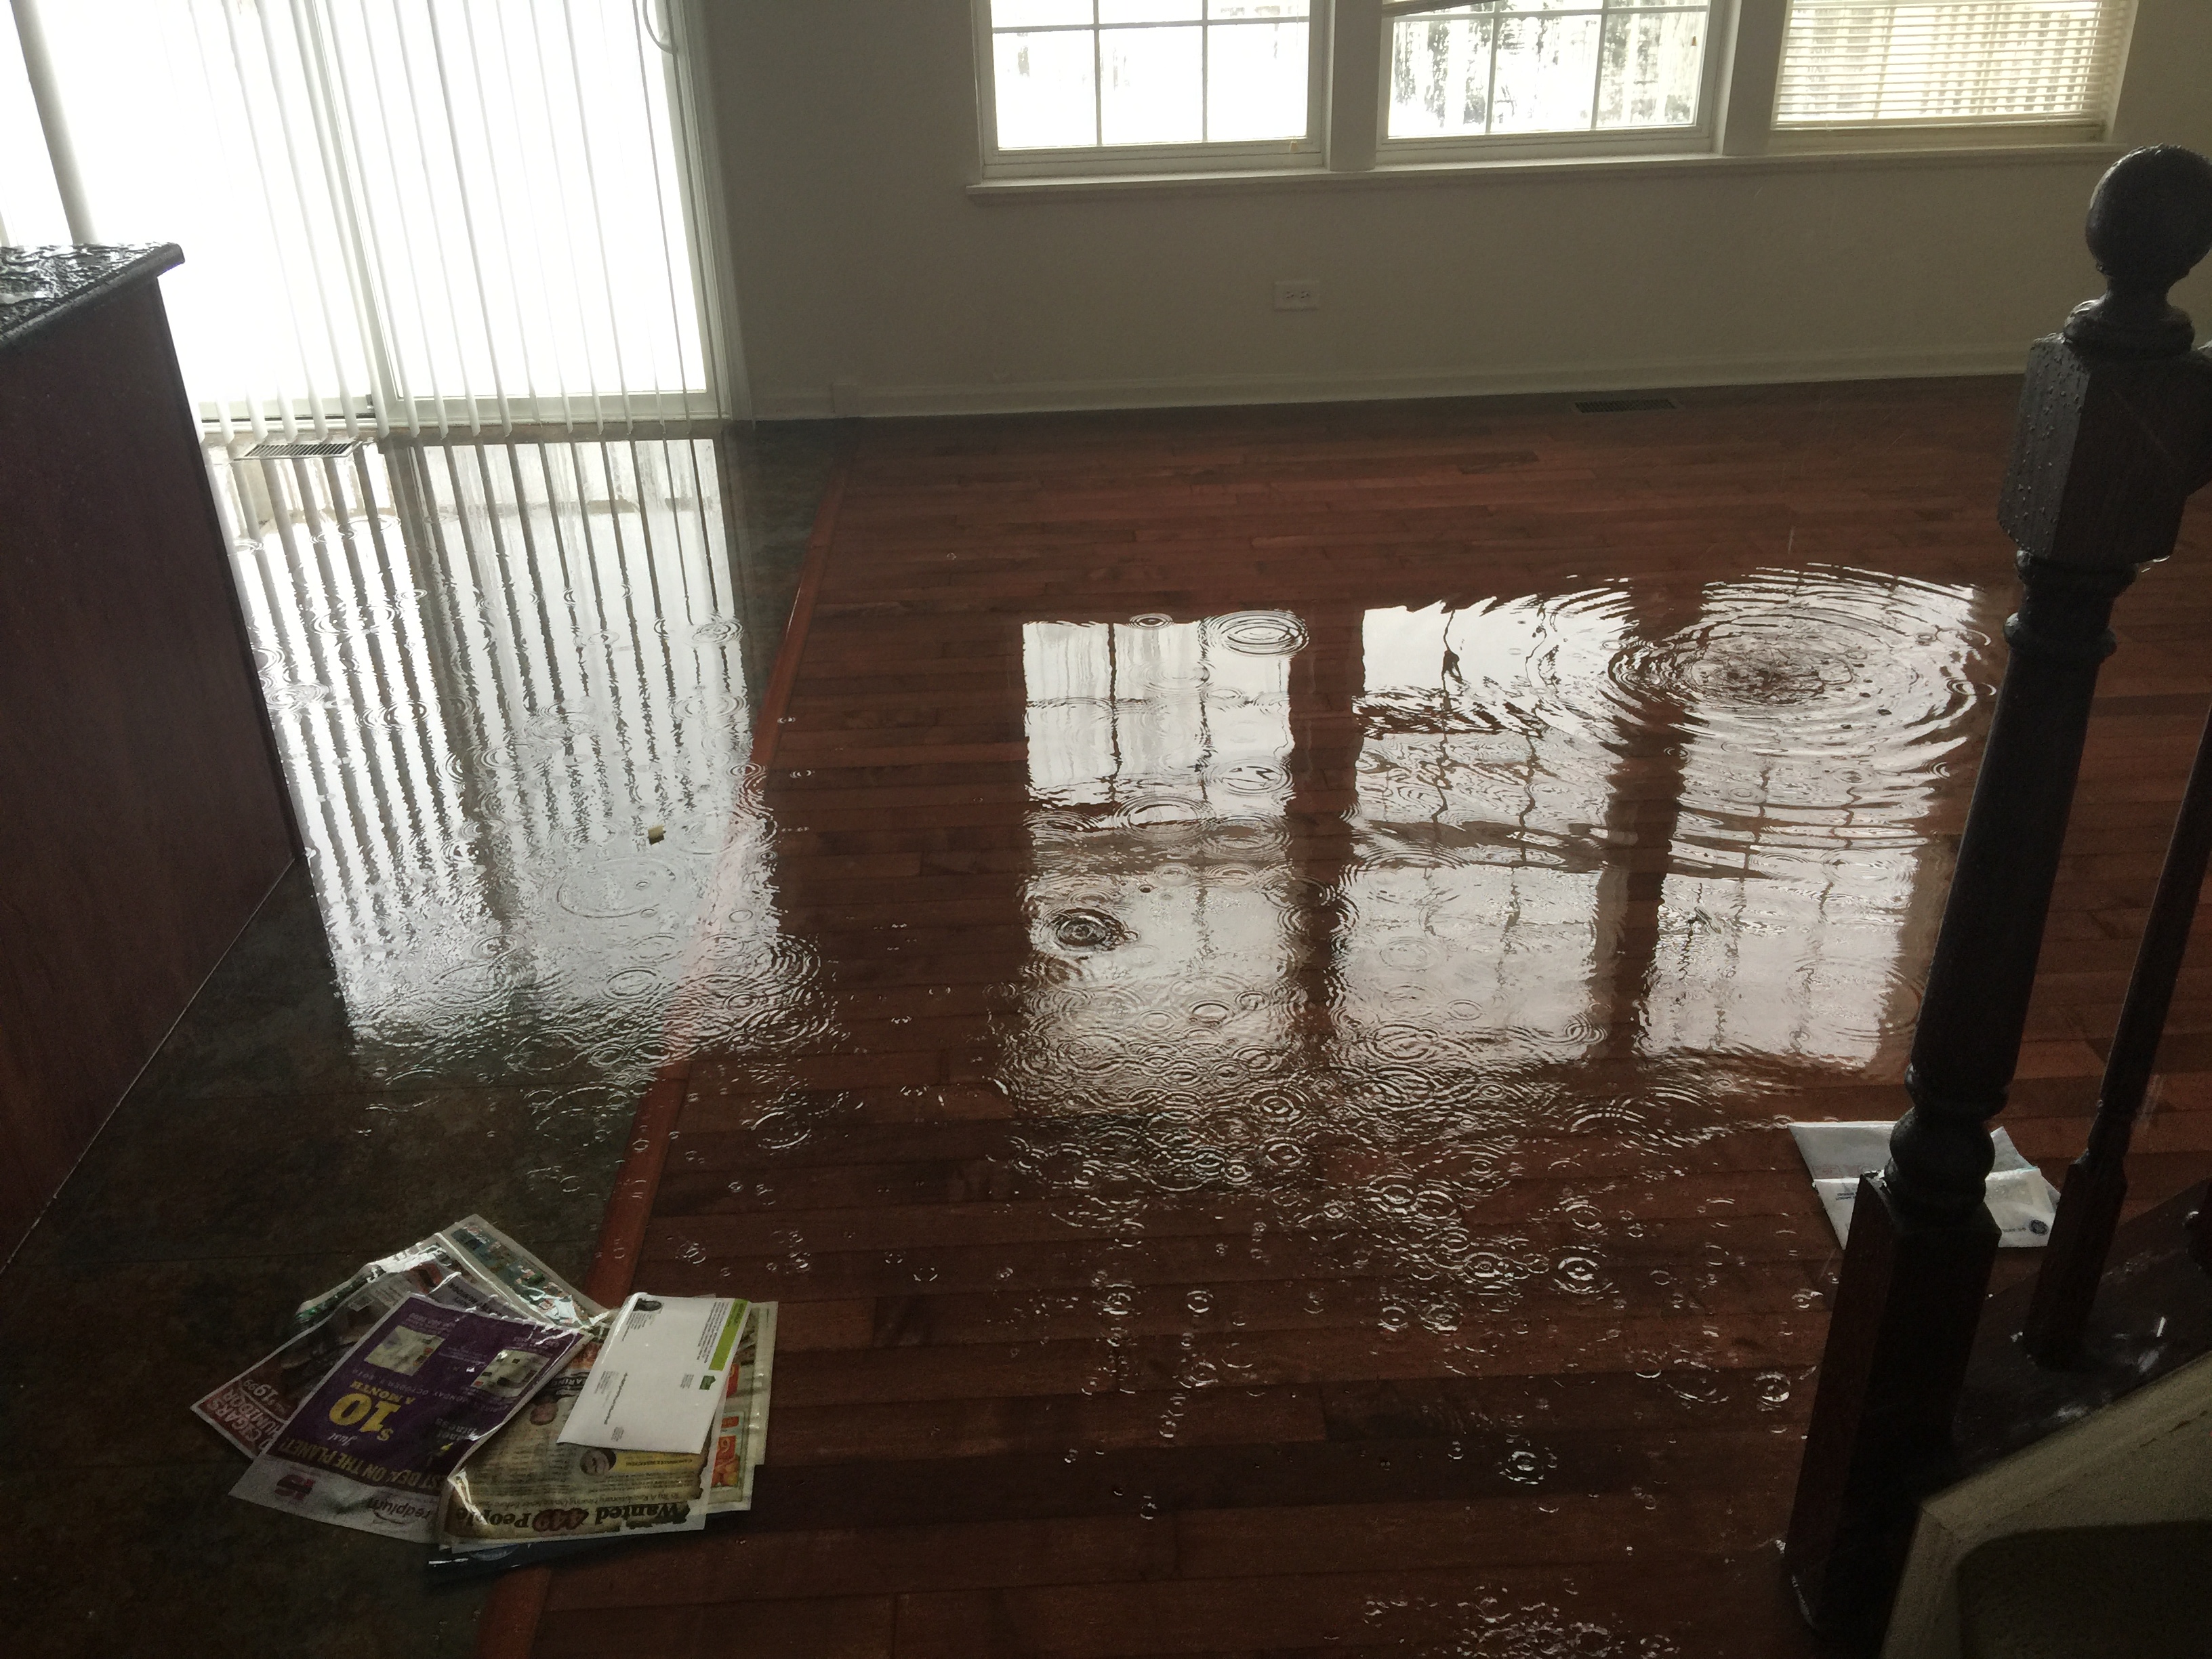 Flood damage in a home. #SERVPRO responded and quickly was on site.